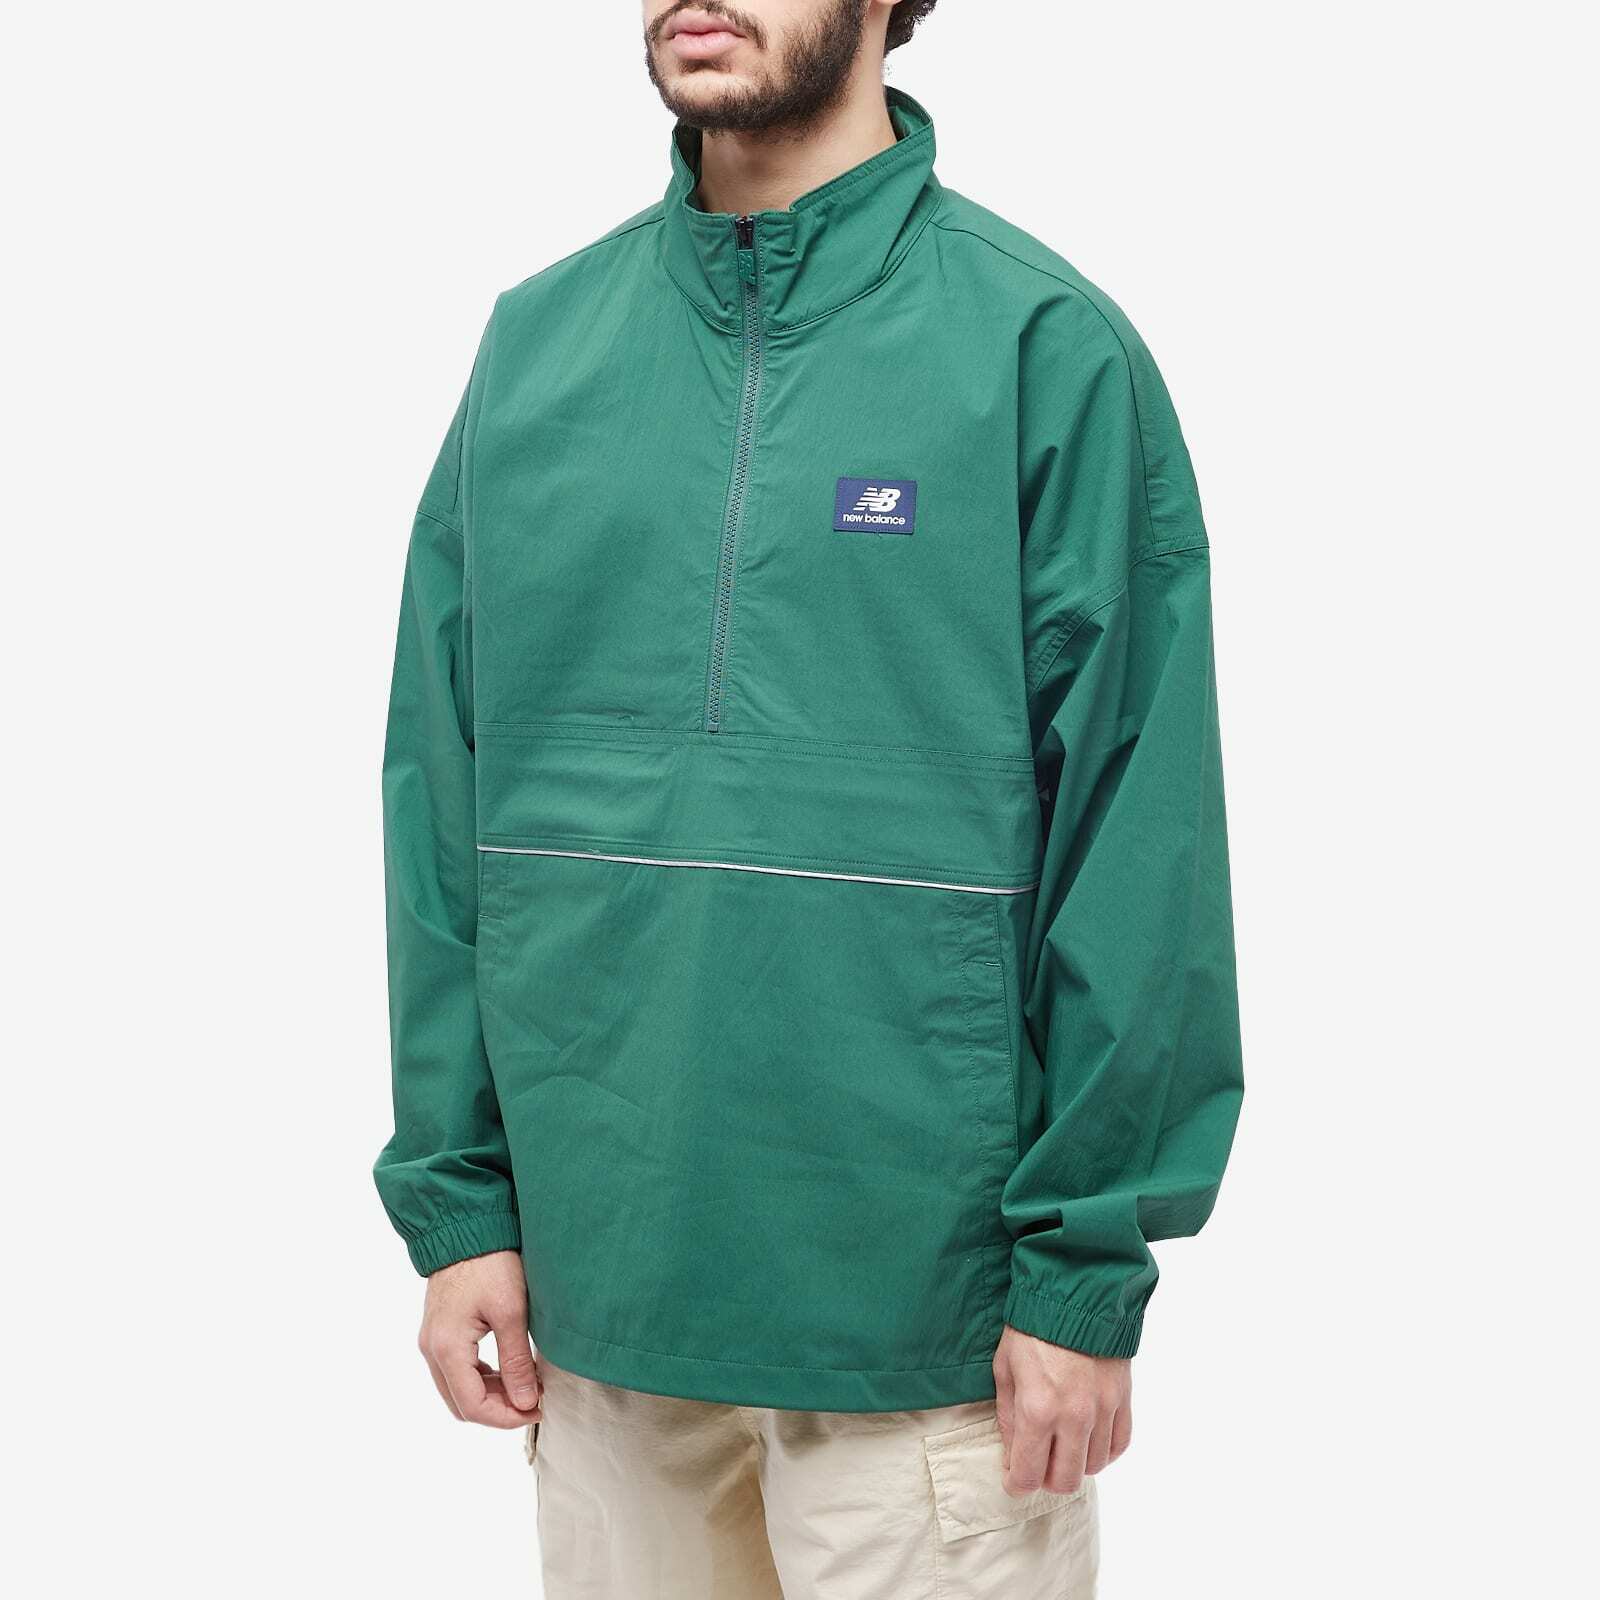 New Balance Men's Sports Club Jacket in Team Forest Green New Balance